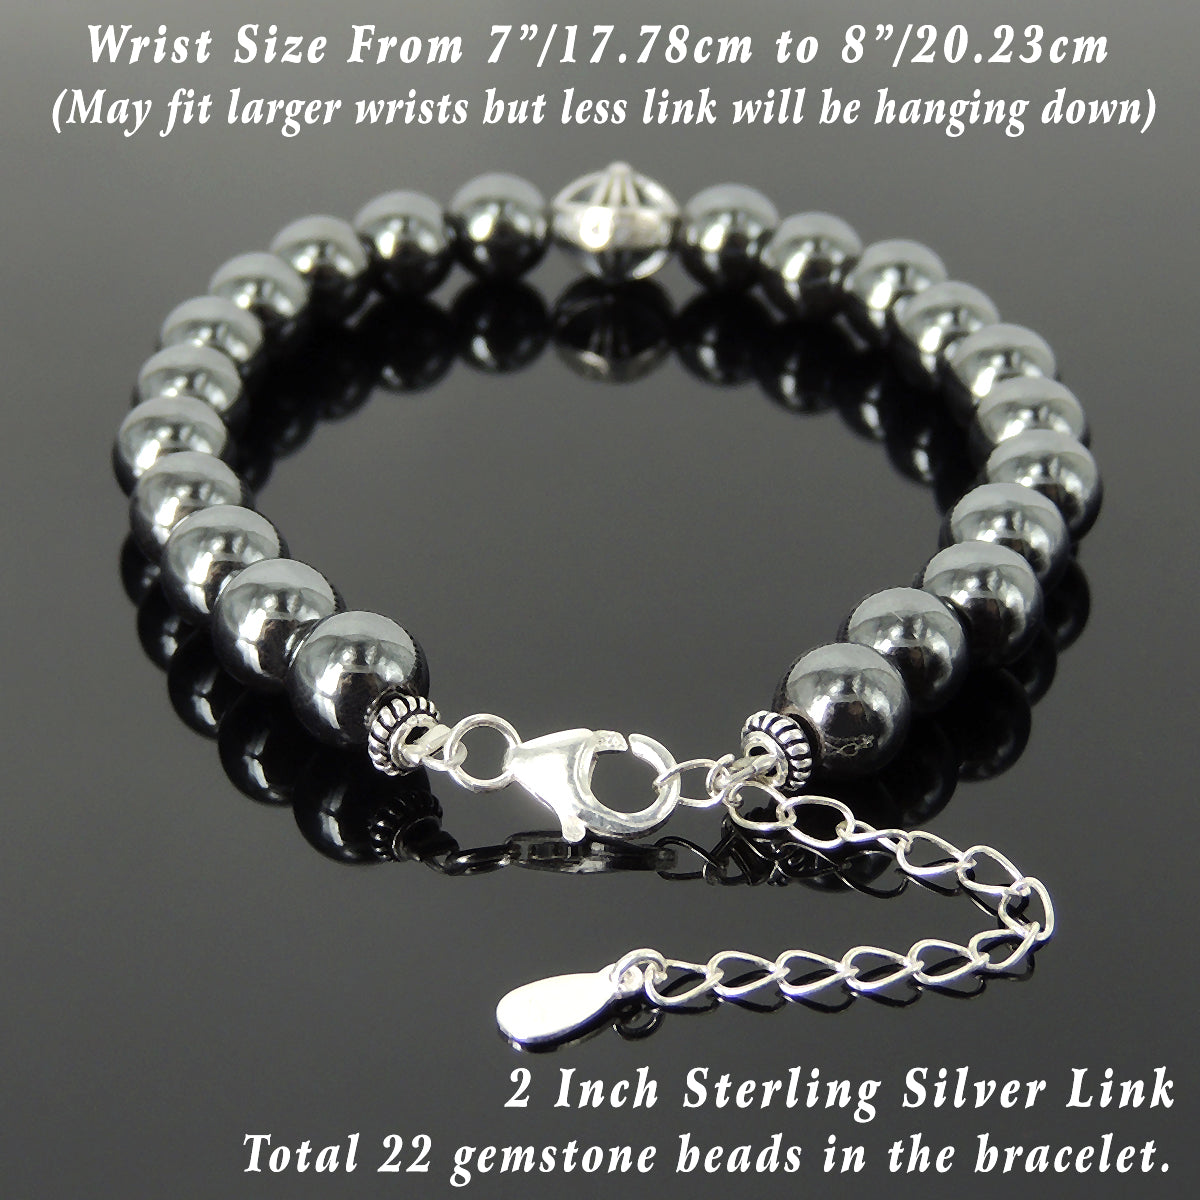 8mm Hematite Stone Bracelet with S925 Sterling Silver Round Celtic Engraved Cross Bead, Chain & Clasp - Handmade by Gem & Silver BR1391